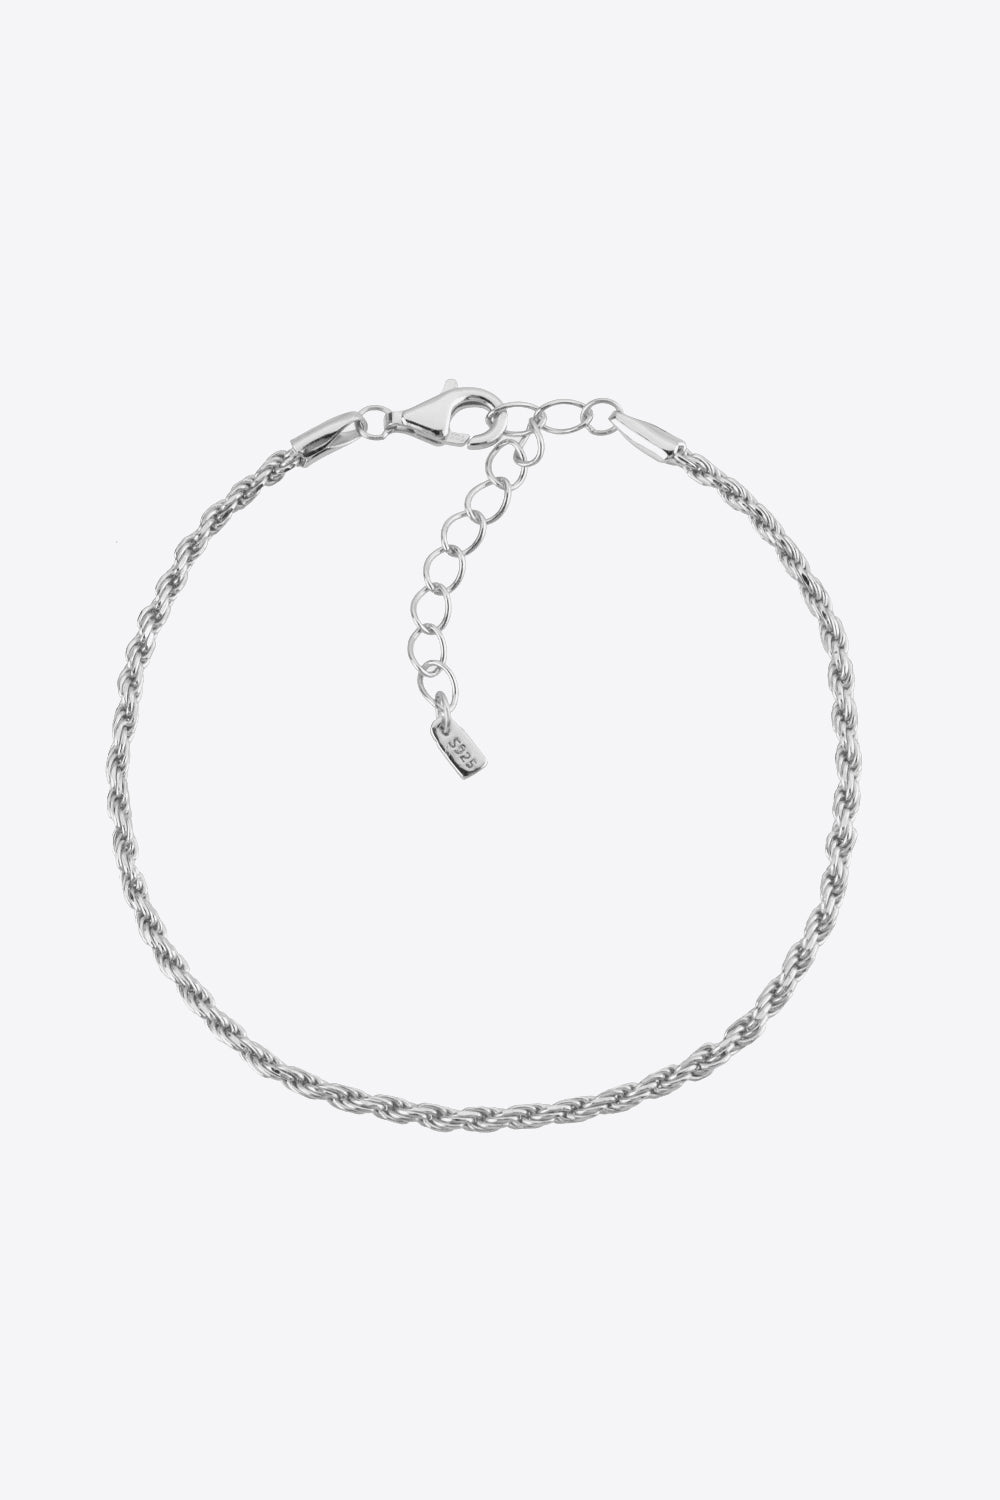 925 Sterling Silver Twisted Bracelet - Tophatter Deals and Online Shopping - Electronics, Jewelry, Beauty, Health, Gadgets, Fashion - Tophatter's Discounts & Offers - tophatters - tophatters.co